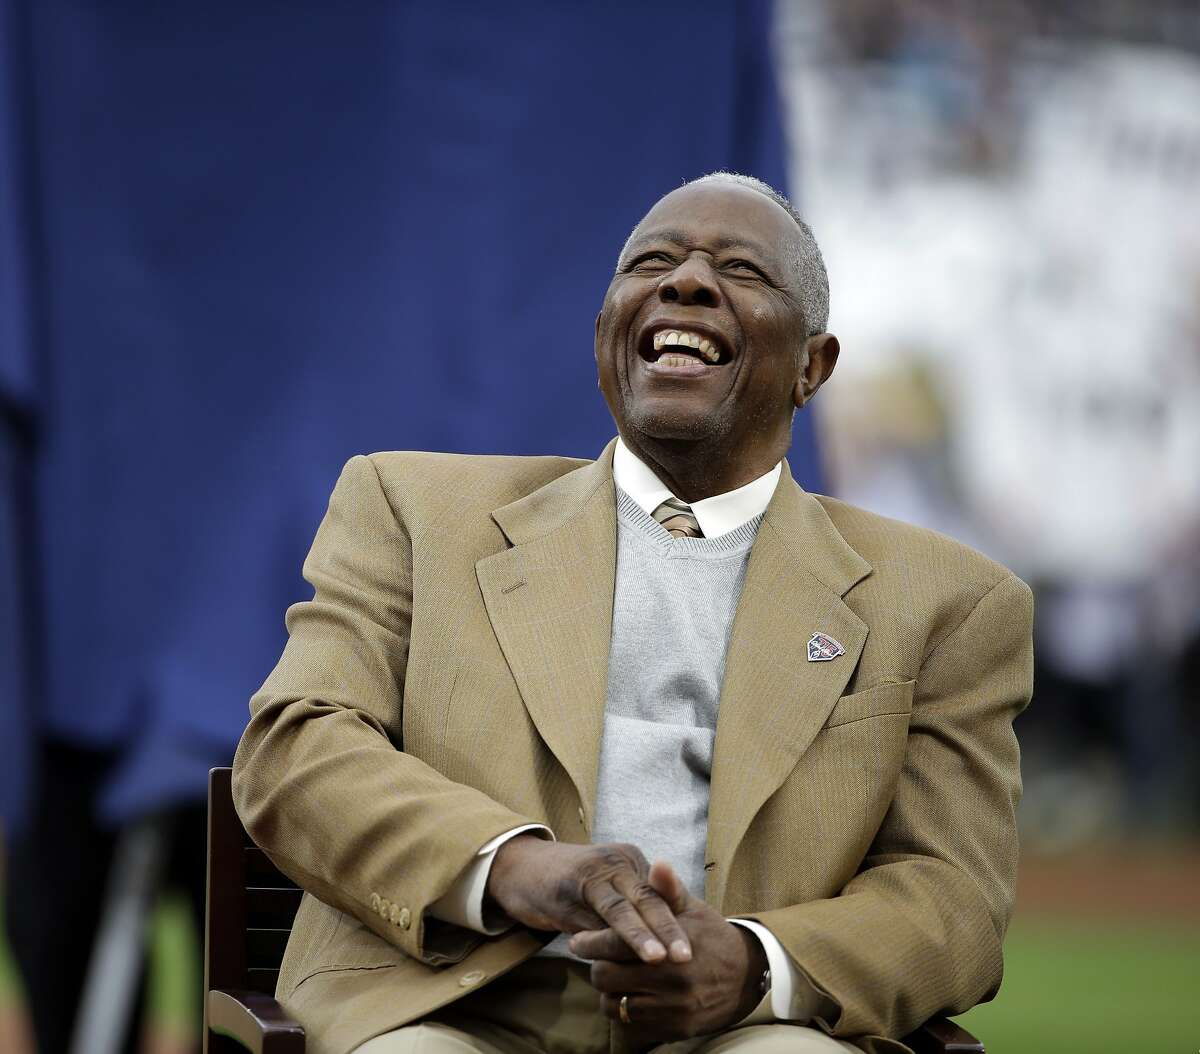 FILE- In this April 8, 2014, file photo, Hank Aaron laughs during a ceremony celebrating the 40th anniversary of his 715th home run before the start of a baseball game between the Atlanta Braves and the New York Mets in Atlanta. Hank Aaron, who endured racist threats with stoic dignity during his pursuit of Babe Ruth but went on to break the career home run record in the pre-steroids era, died early Friday, Jan. 22, 2021. He was 86. The Atlanta Braves said Aaron died peacefully in his sleep. No cause of death was given. (AP Photo/David Goldman, File)